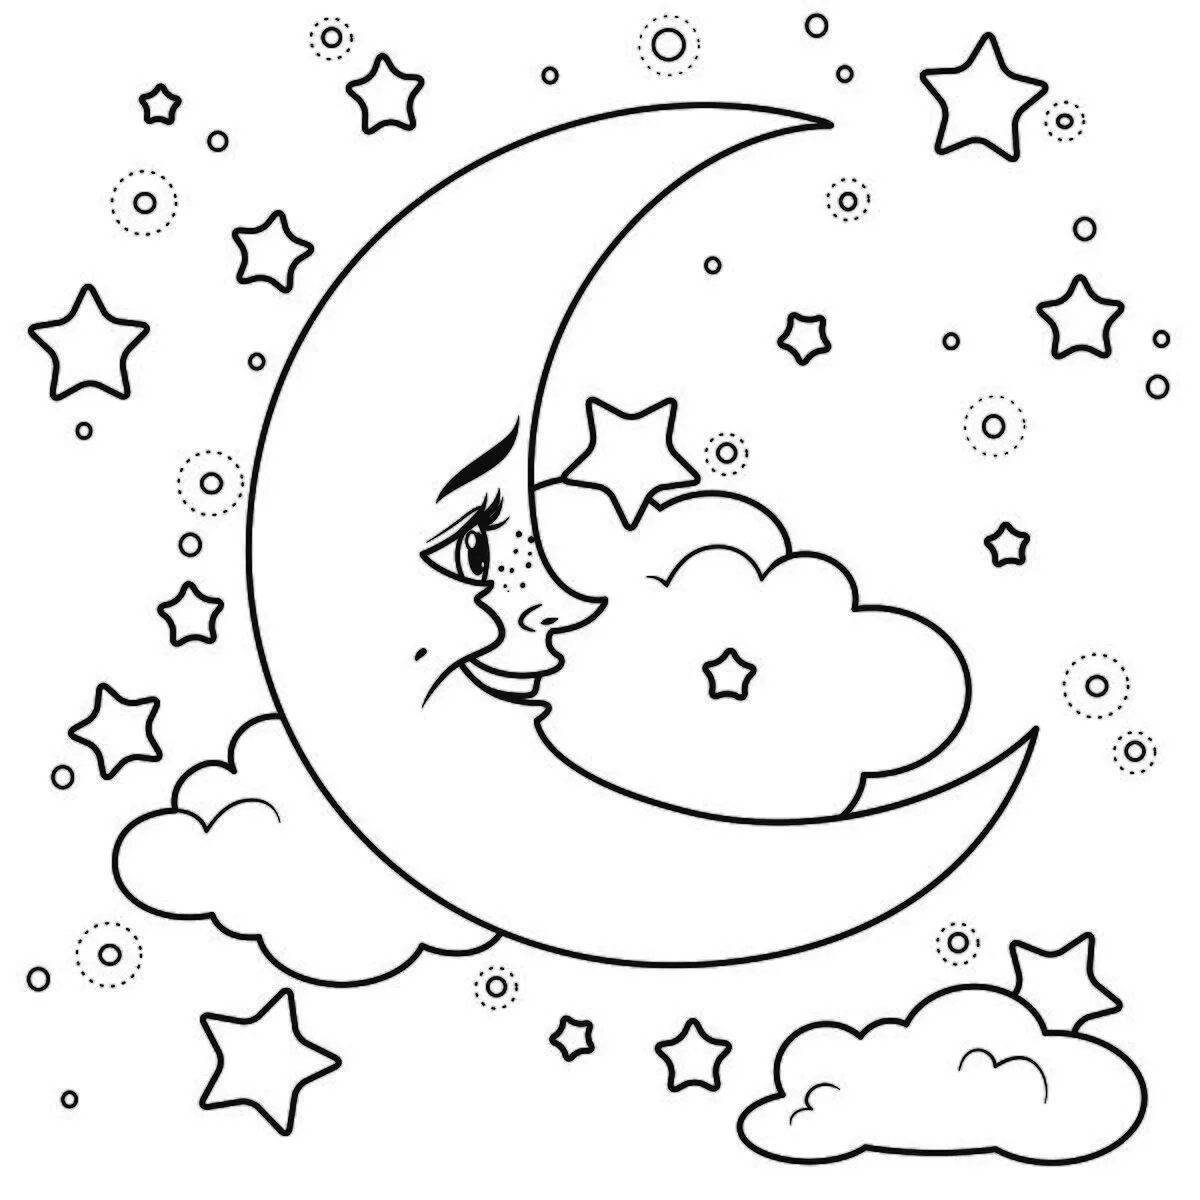 Bright Crescent Coloring Page